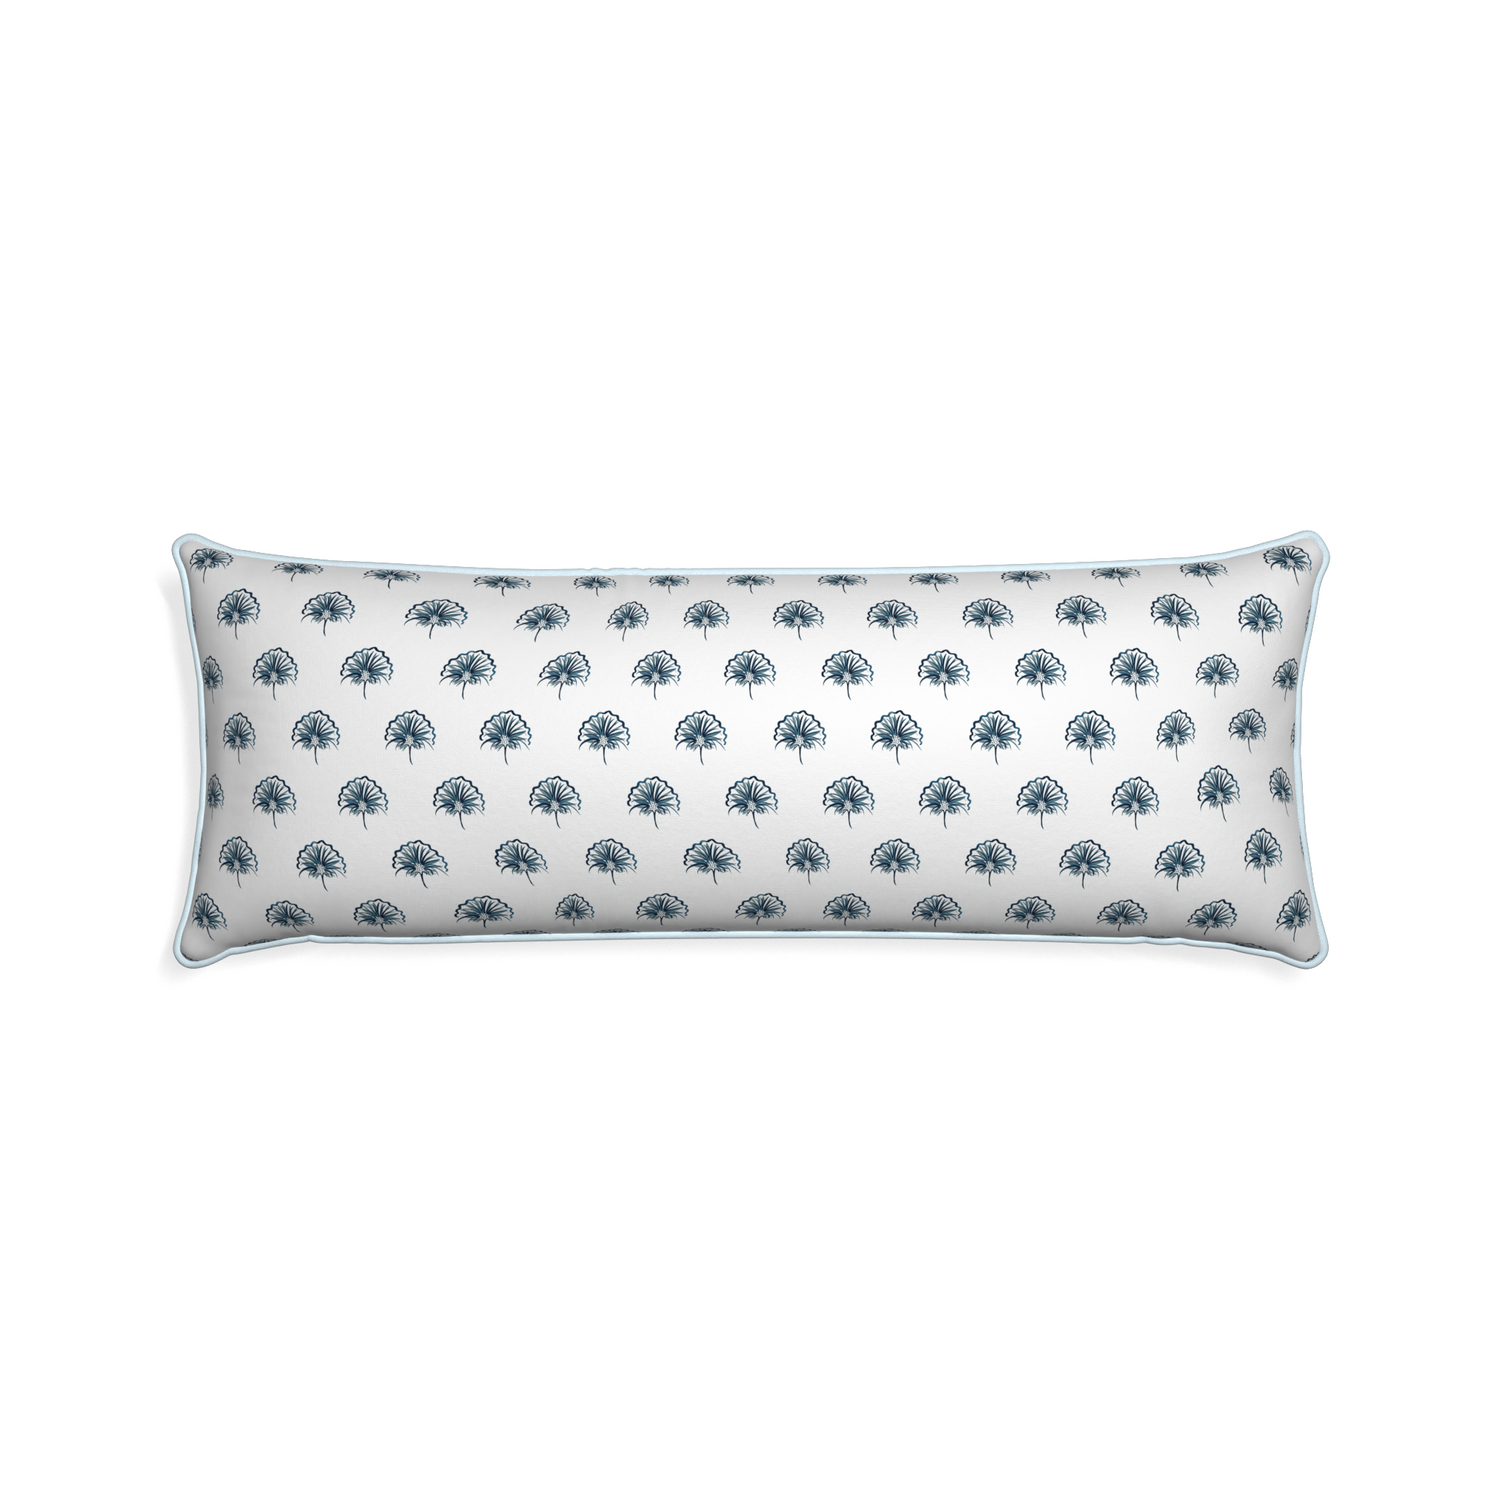 Xl-lumbar penelope midnight custom floral navypillow with powder piping on white background